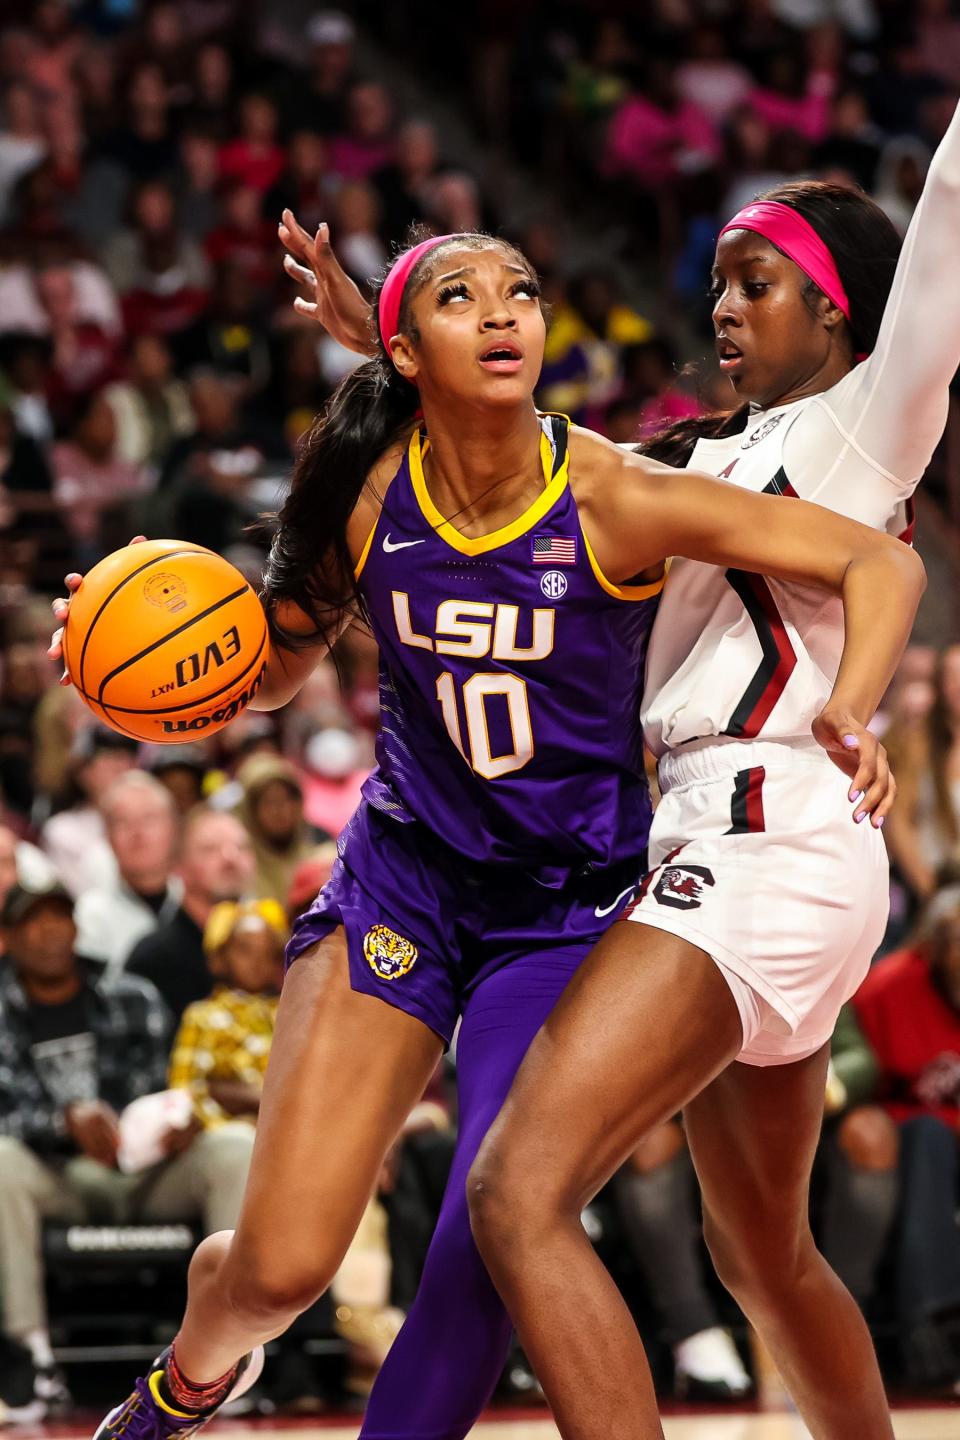 Can Angel Reese start a new streak of double-doubles on Thursday vs. Ole Miss?